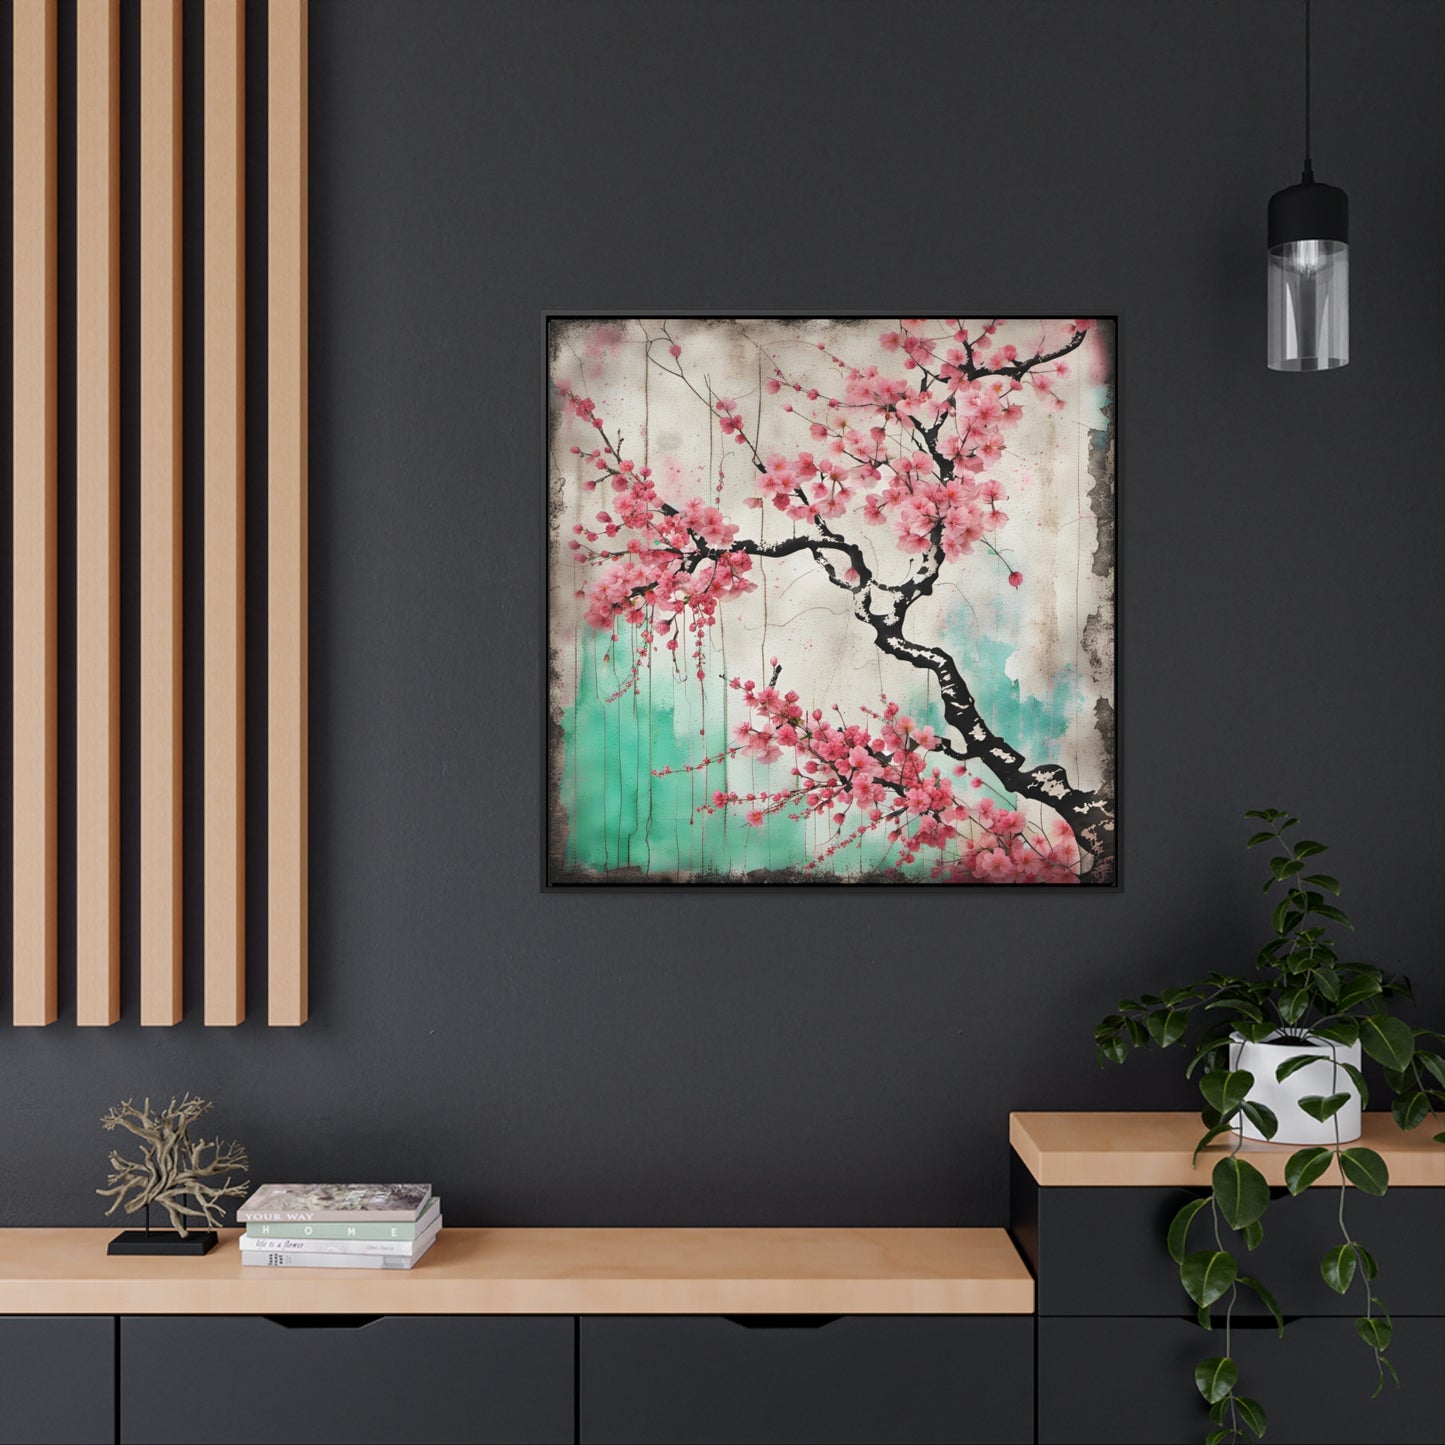 Floral themed Wall Art Print - Cherry Blossoms Street Art Style Print on Canvas in a Floating Frame